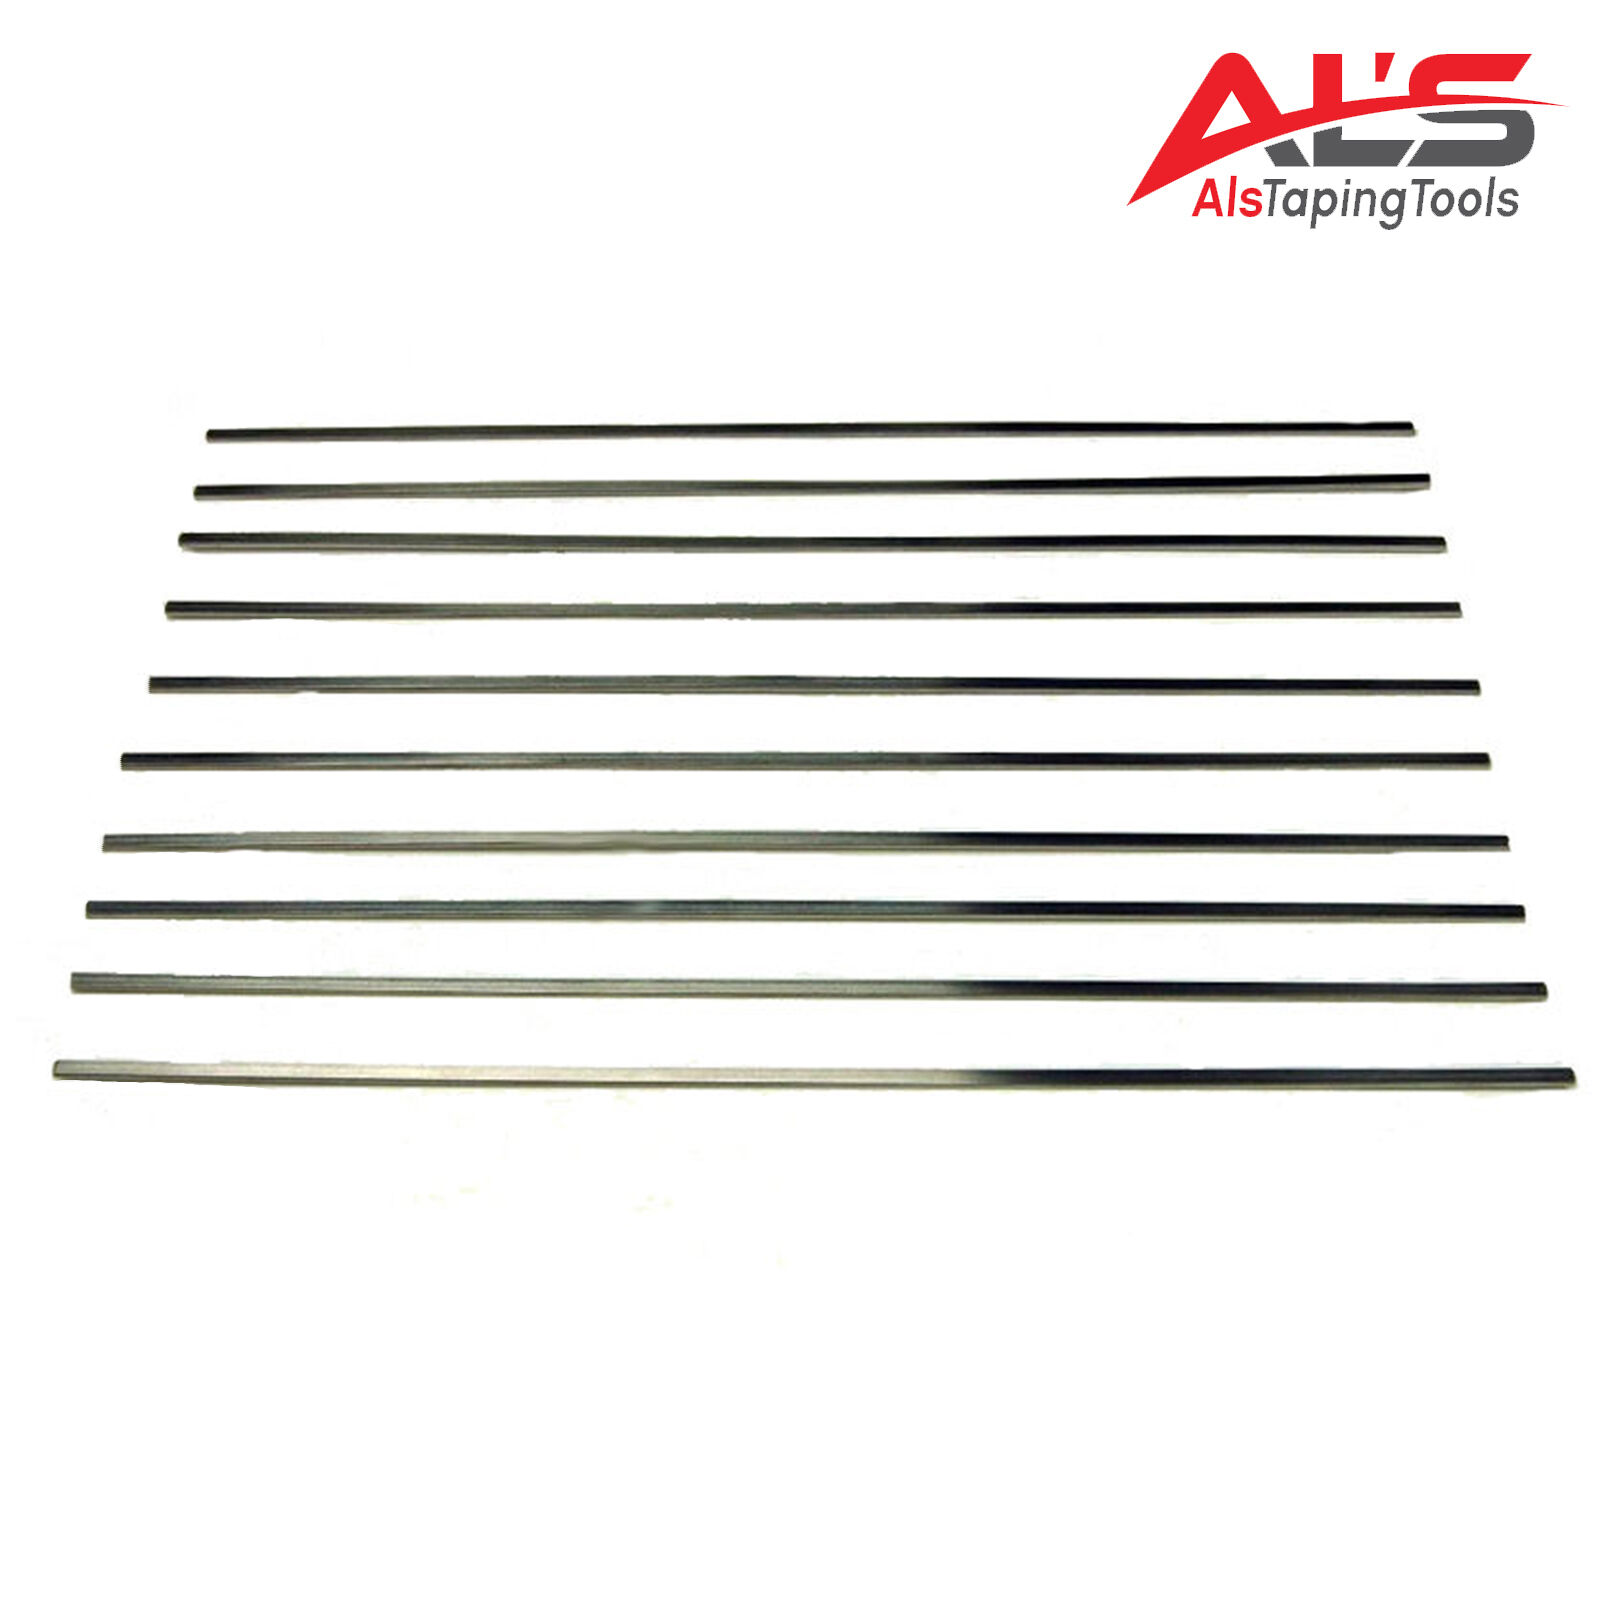 12" Stainless Steel Drywall Flat Box Blades - 10 Pack